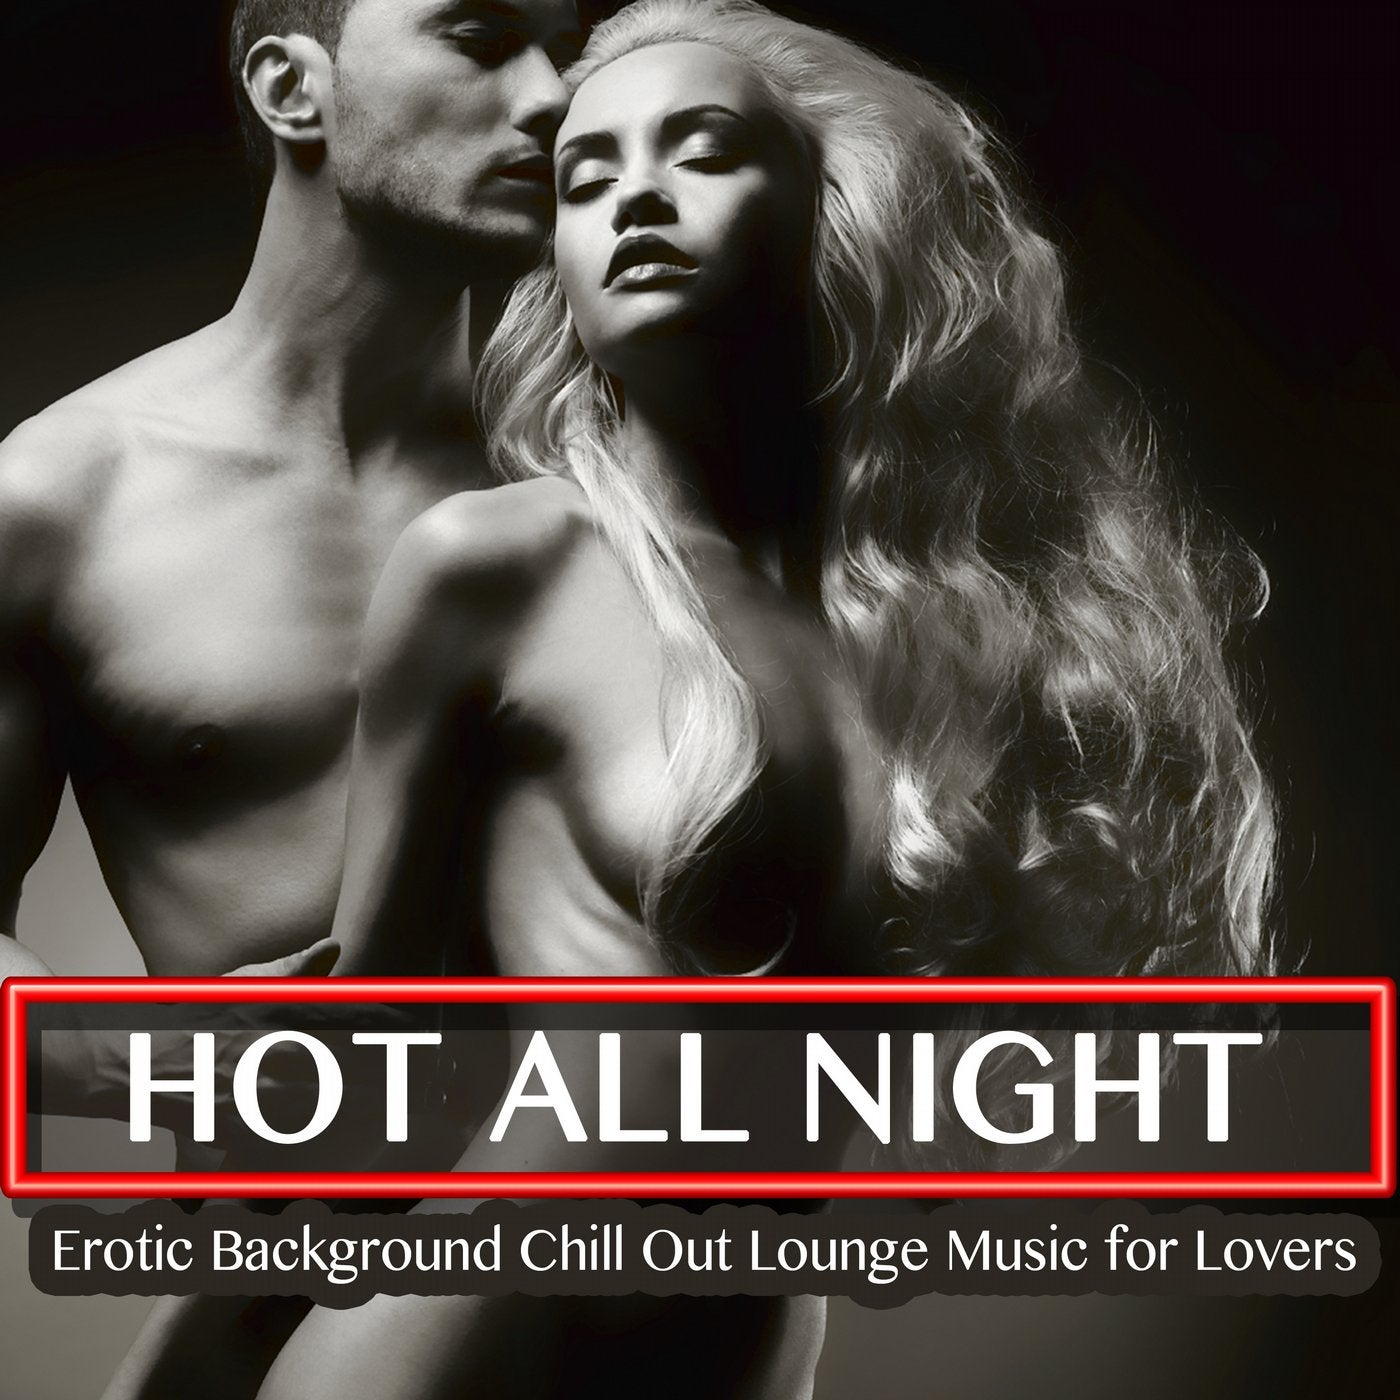 Hot All Night - Erotic Background Chill Out Lounge Music for Lovers